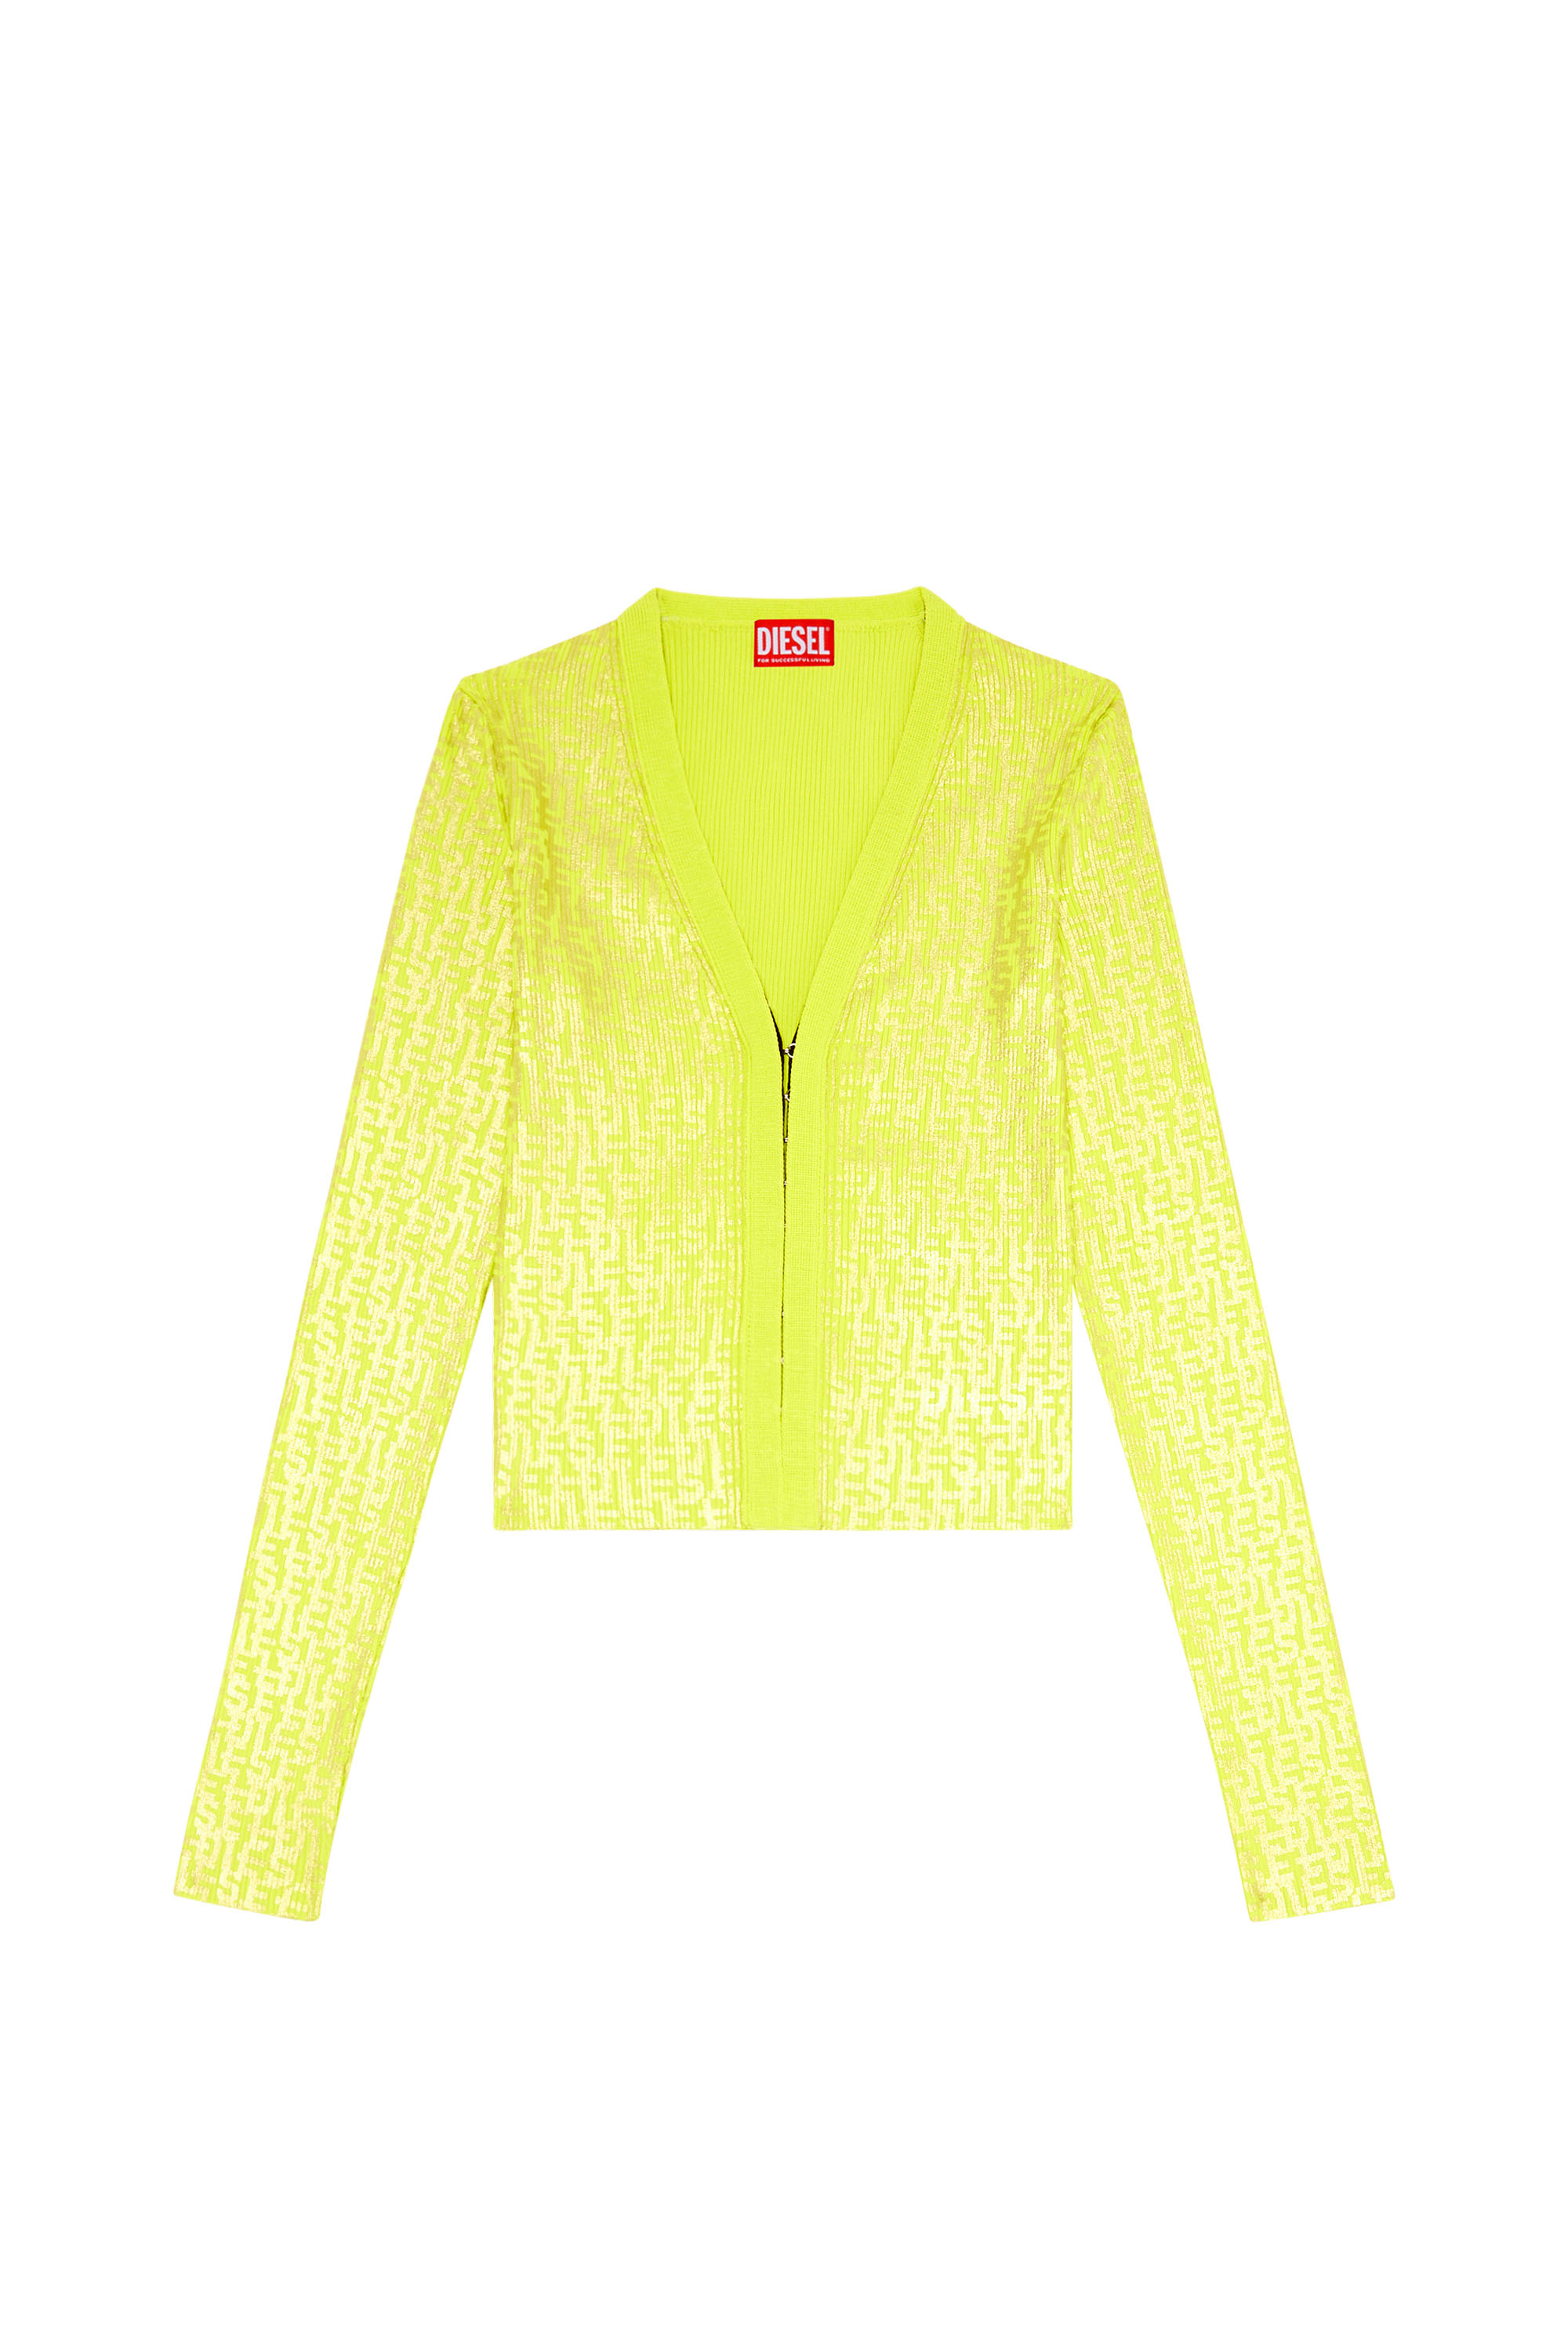 Diesel - M-GRIA, Giallo - Image 3